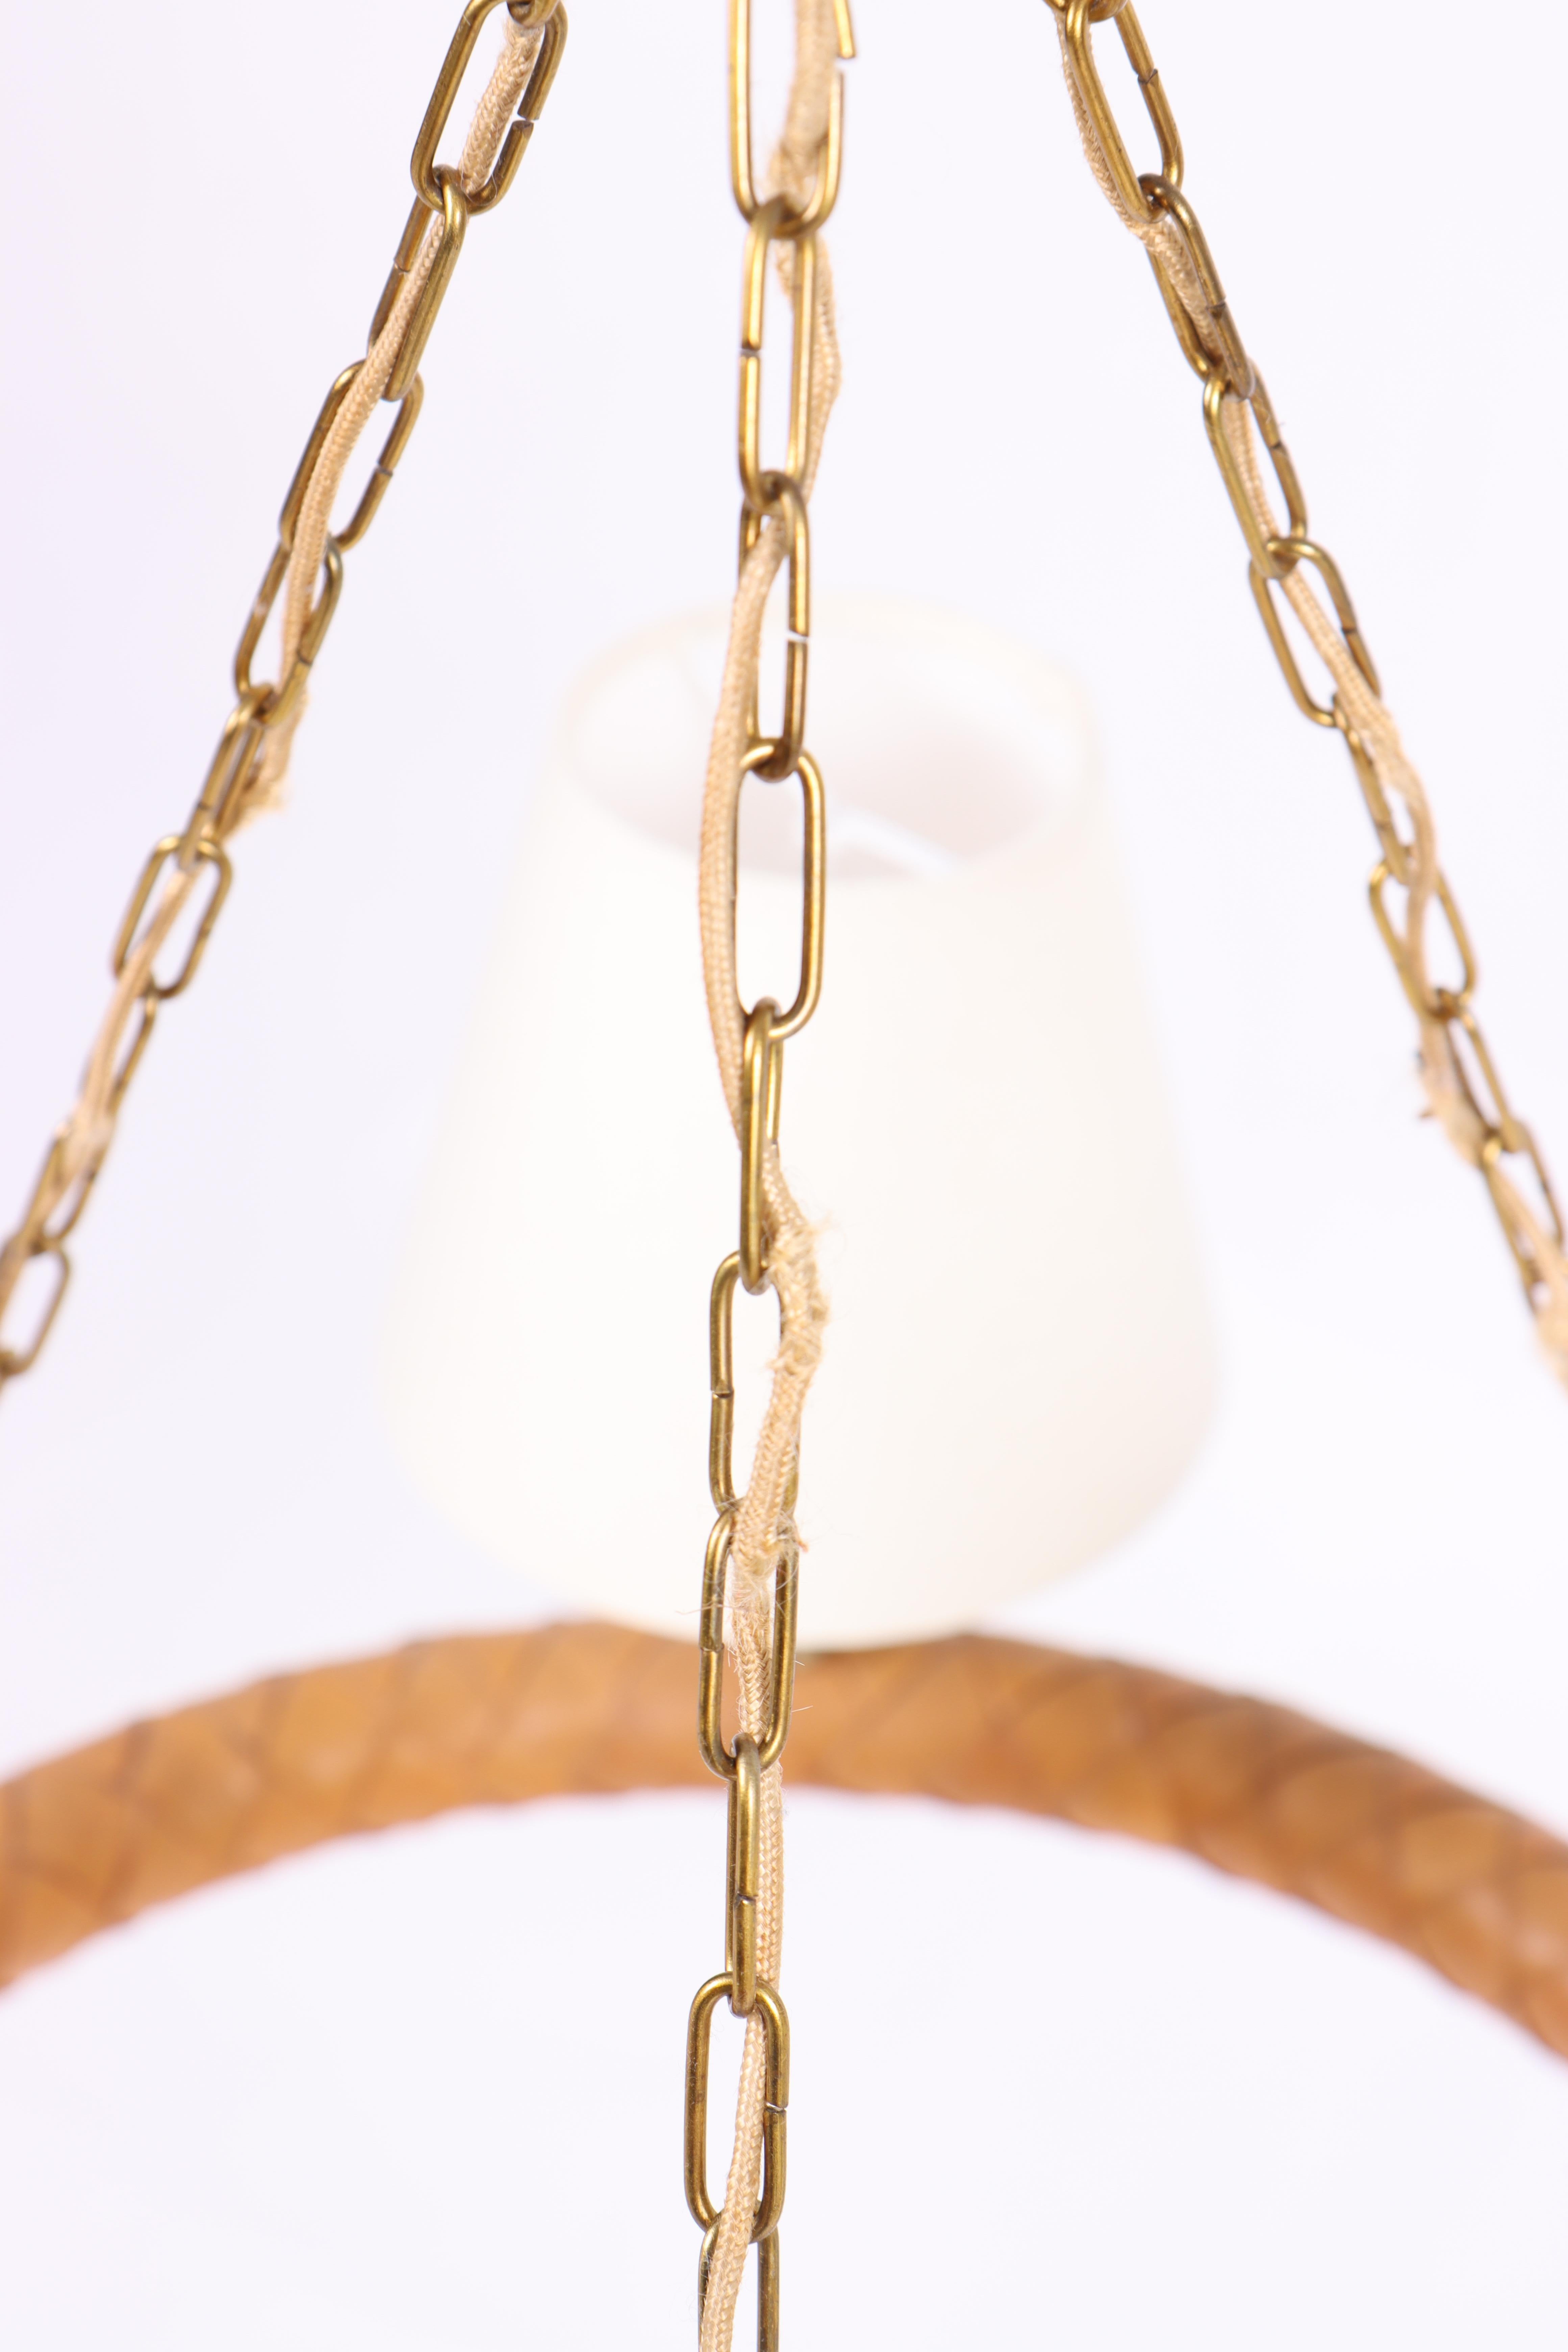 Midcentury Chandelier in Braided Leather by Jo Hammerborg, 1960s For Sale 1